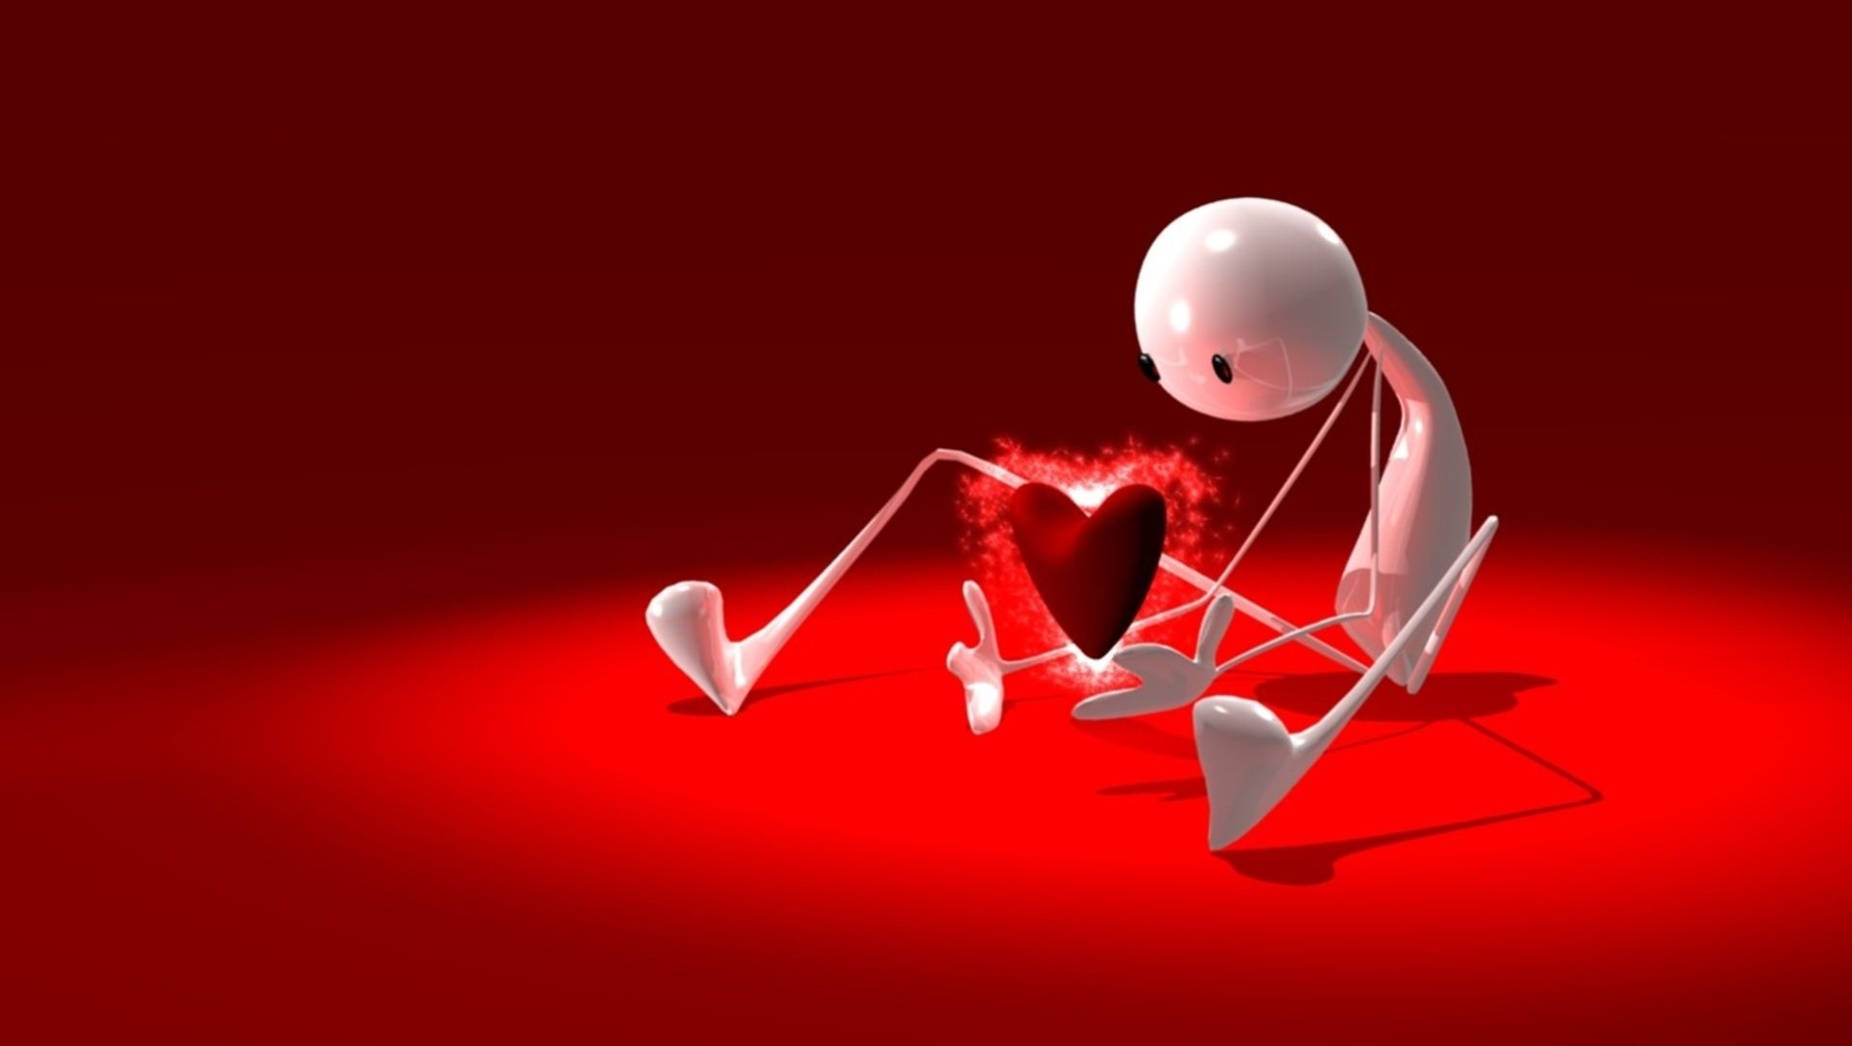 White Human Robot With Heart 3D Animation Wallpaper